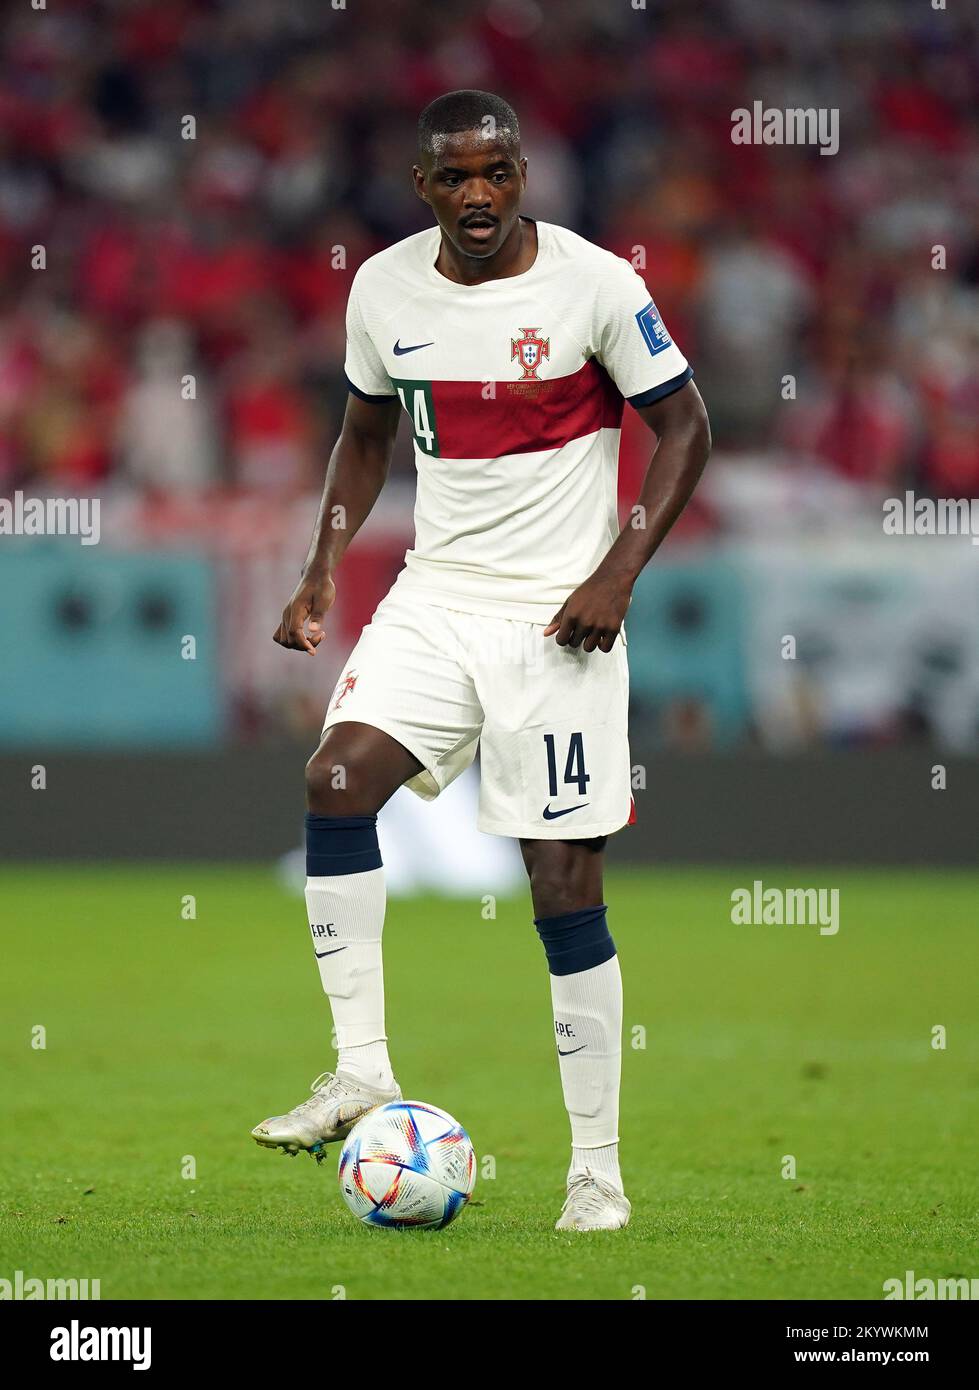 Portugal's William Carvalho during the FIFA World Cup Group H match at the Education City Stadium in Al-Rayyan, Qatar. Picture date: Friday December 2, 2022. Stock Photo